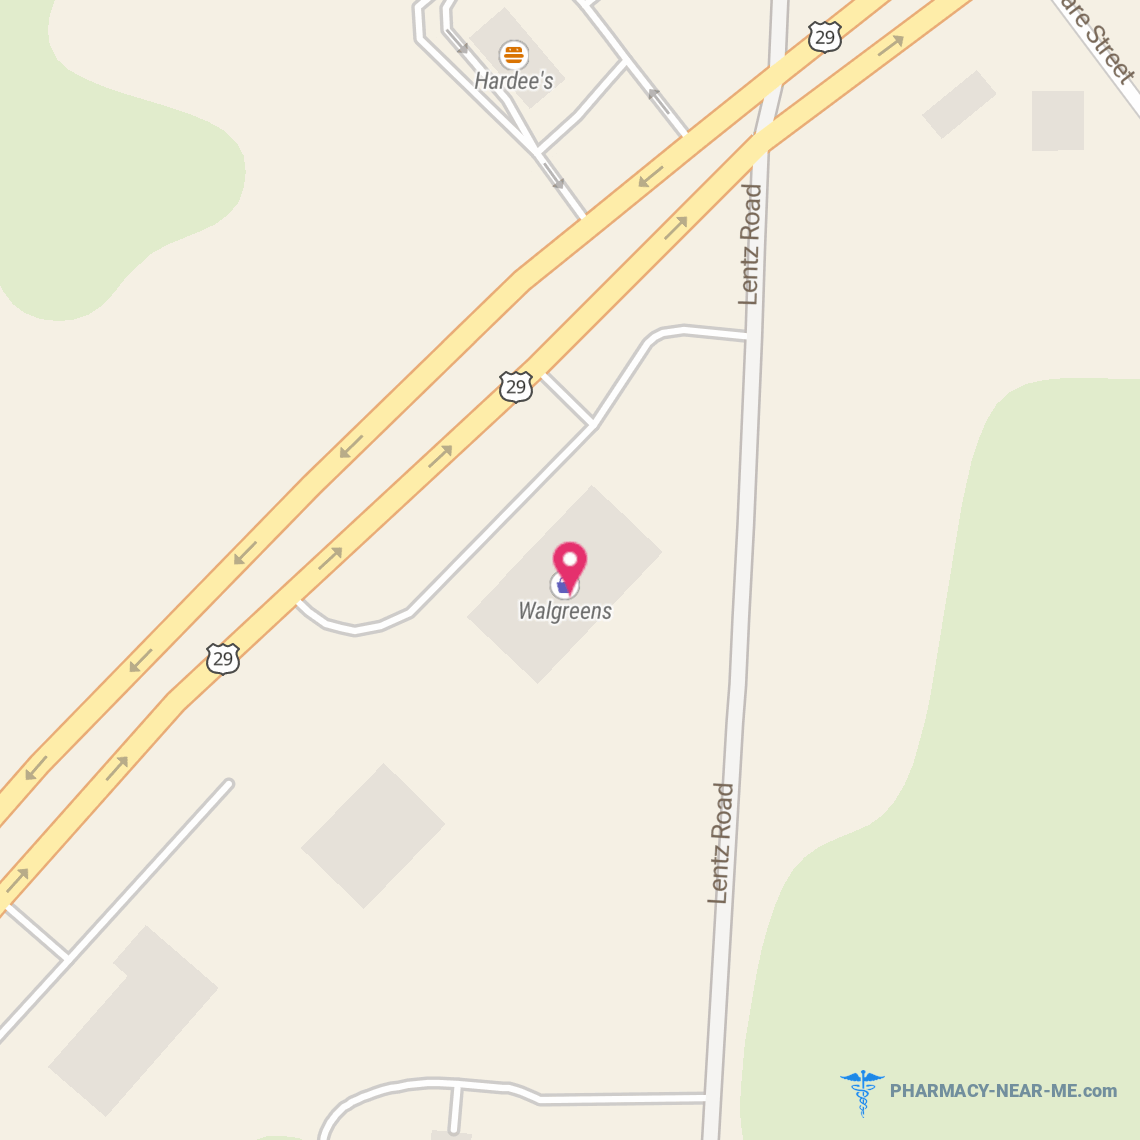 RITE AID - Pharmacy Hours, Phone, Reviews & Information: 508 US Route 29, China Grove, North Carolina 28023, United States